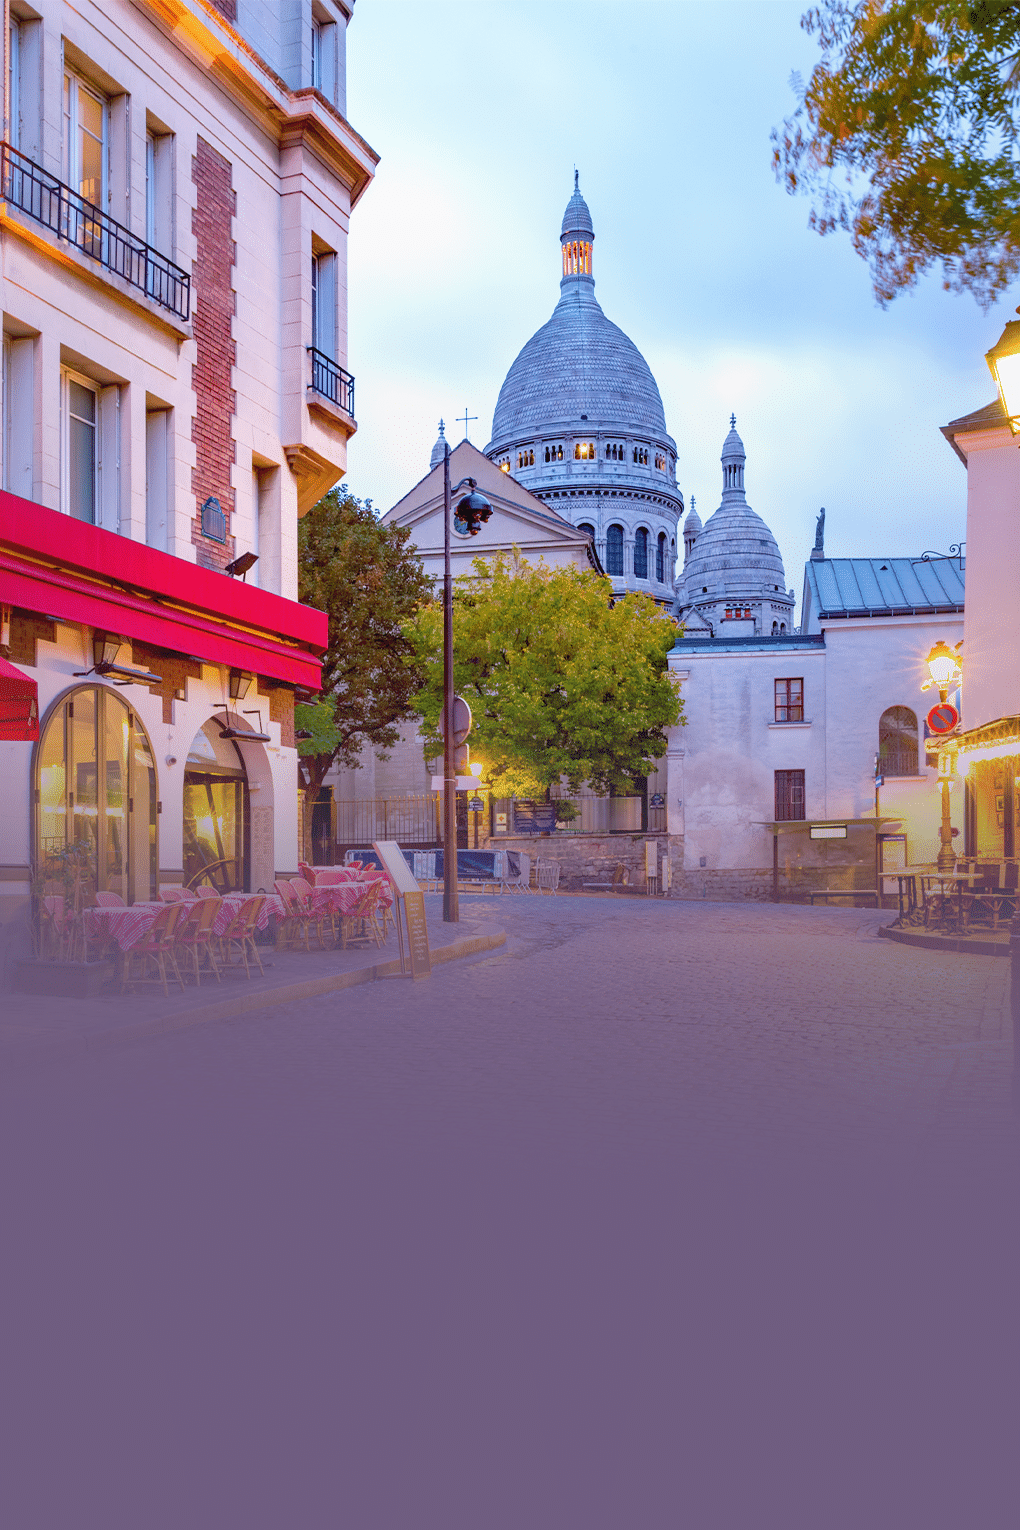 Charm of Europe Group Tour with FREE Montmartre Tour